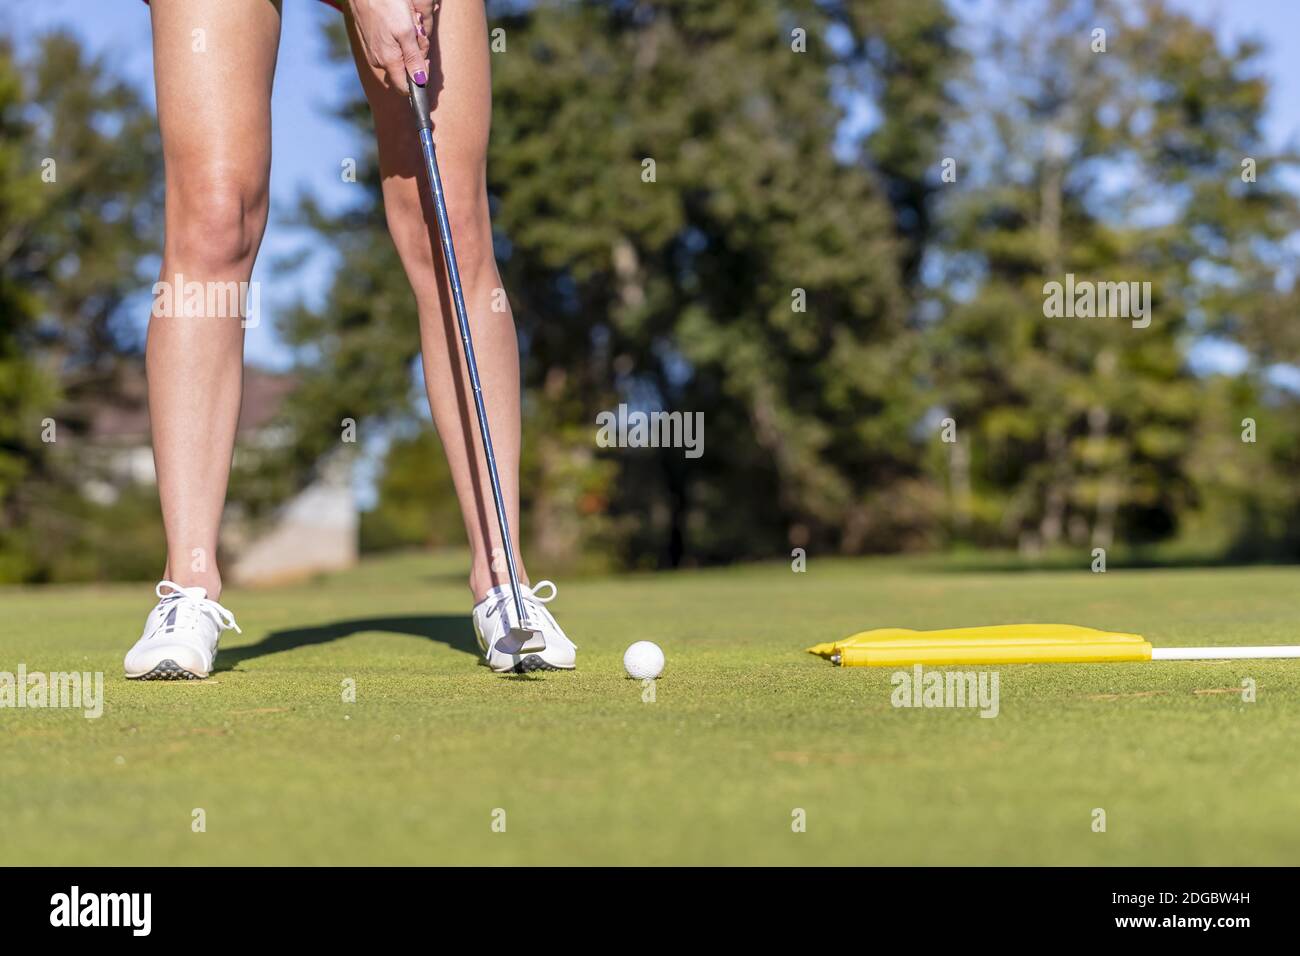 Lovely Blonde Female Golfter Enjoying A Round Of Golf On A Public Golf Course Stock Photo